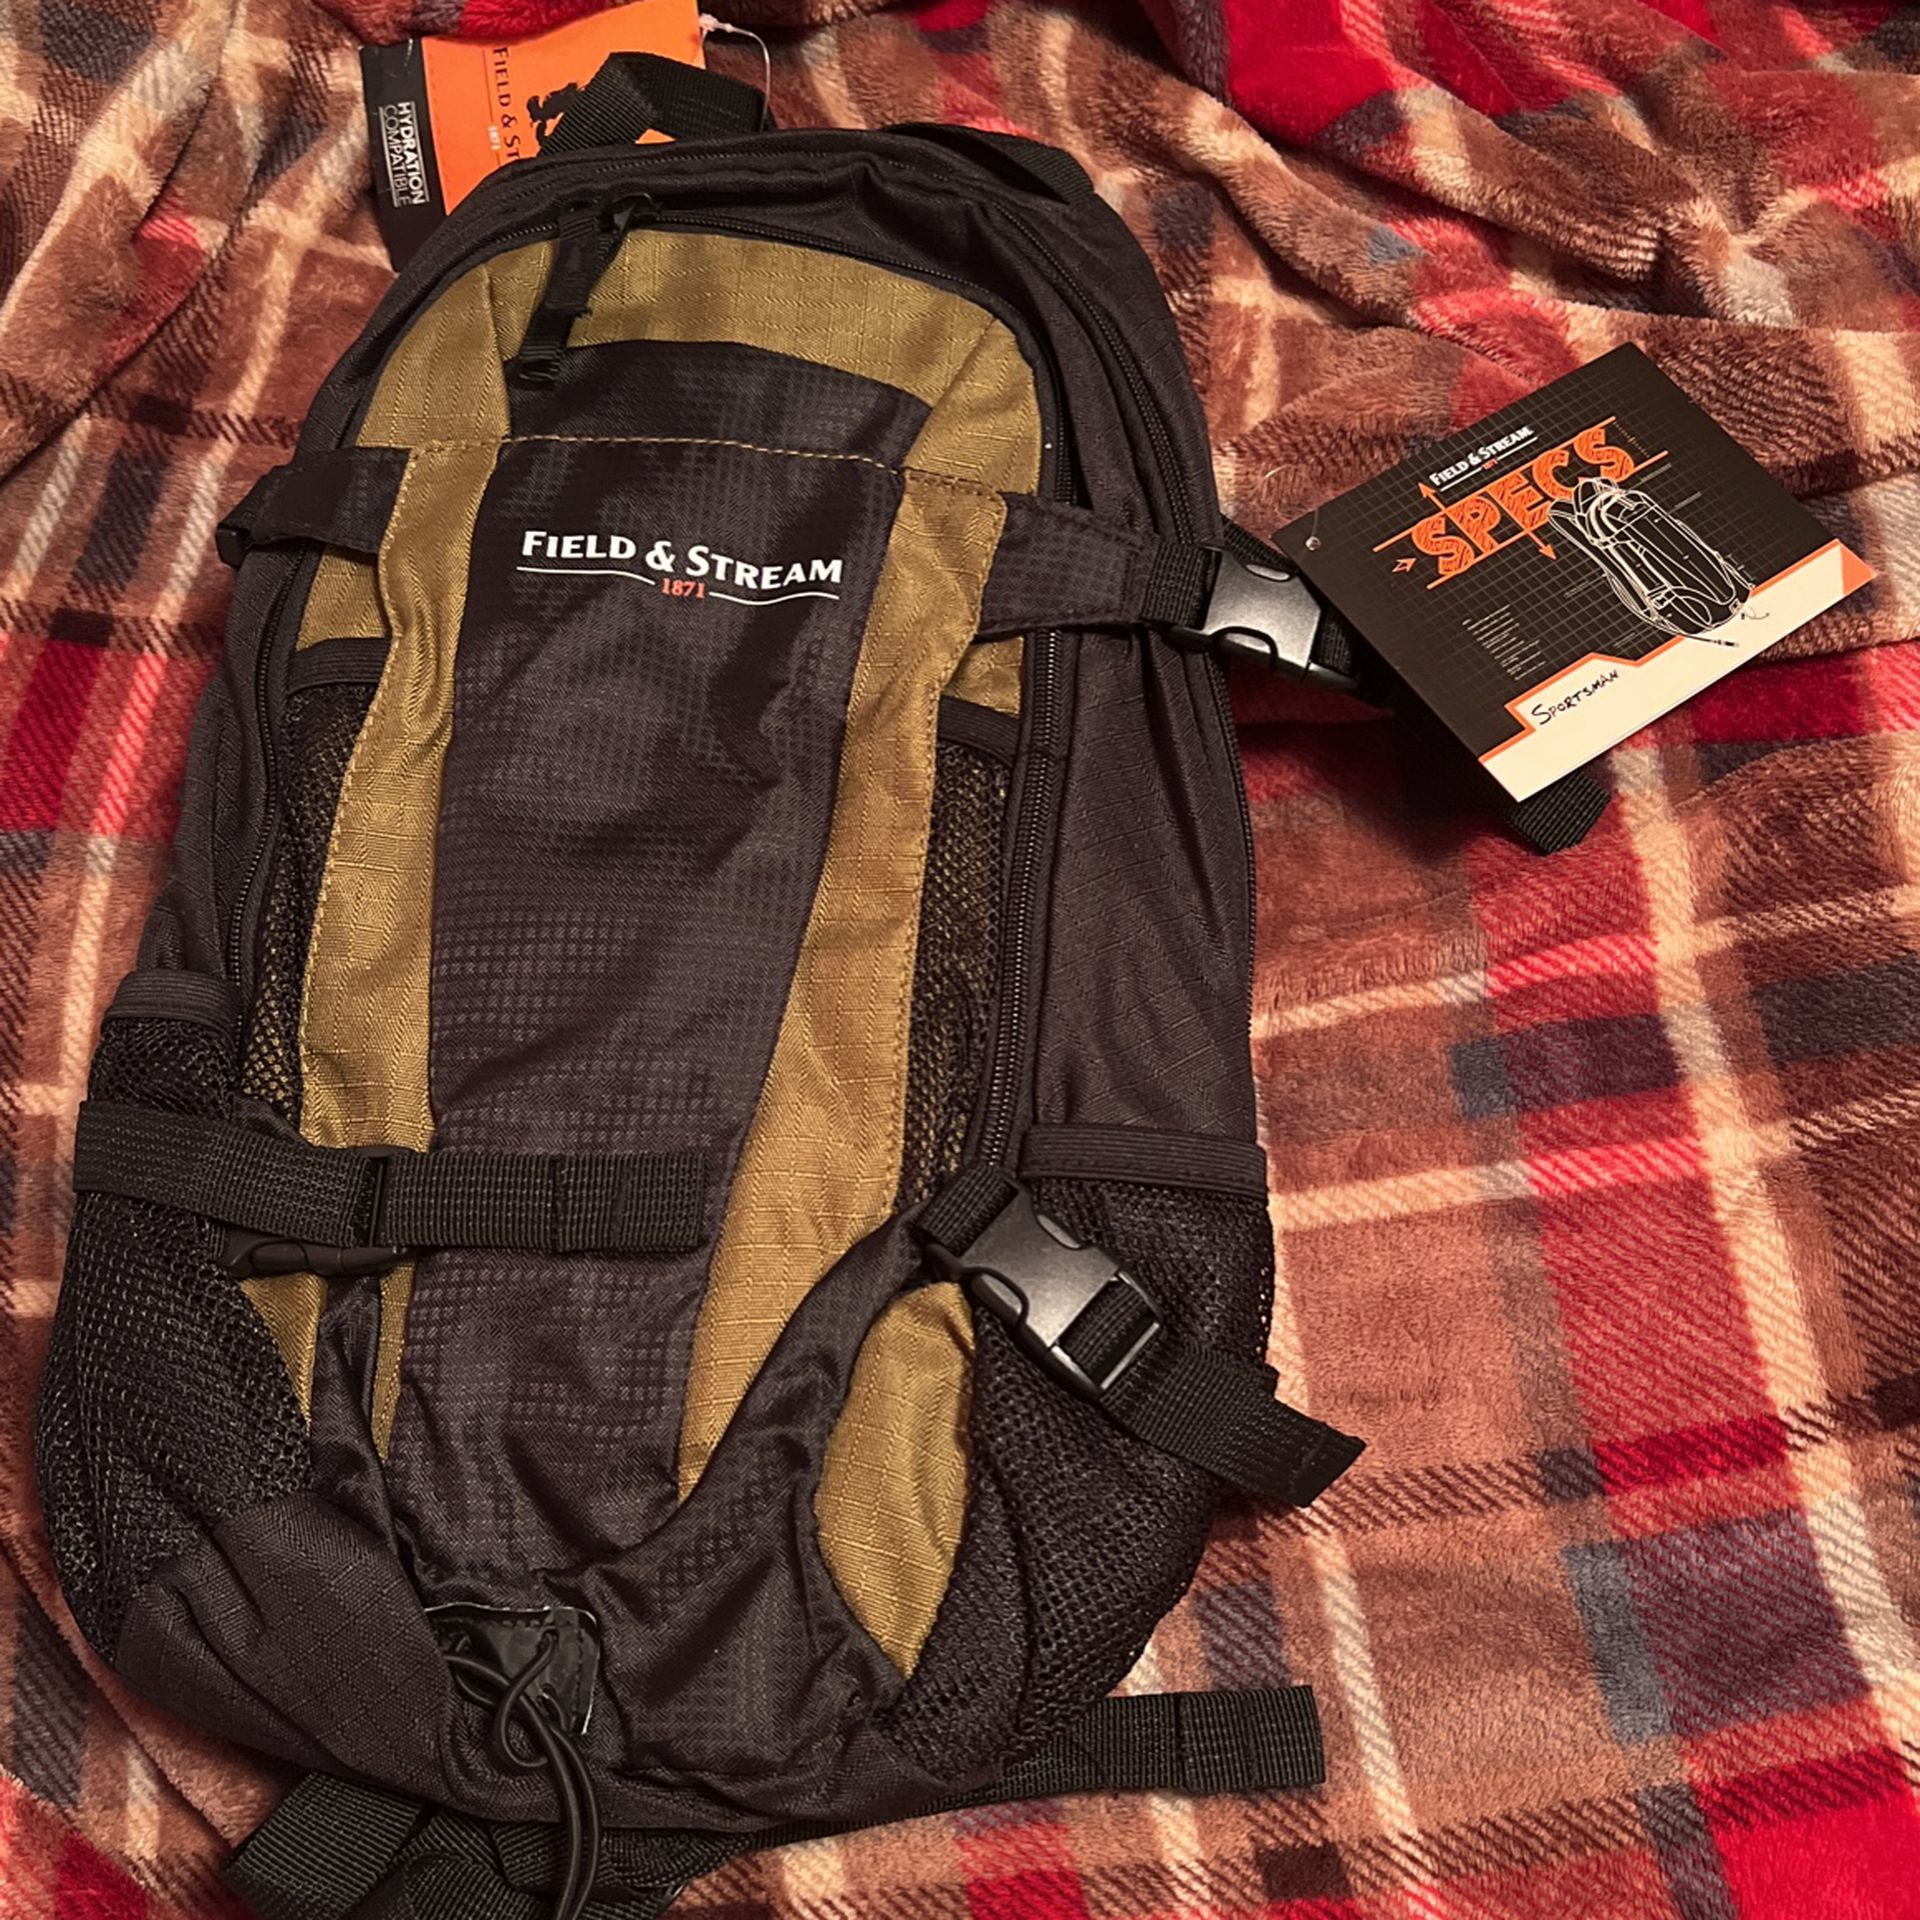 Brand New Field And Stream Backpack For Hiking, Has Hydration Pack Built Into It